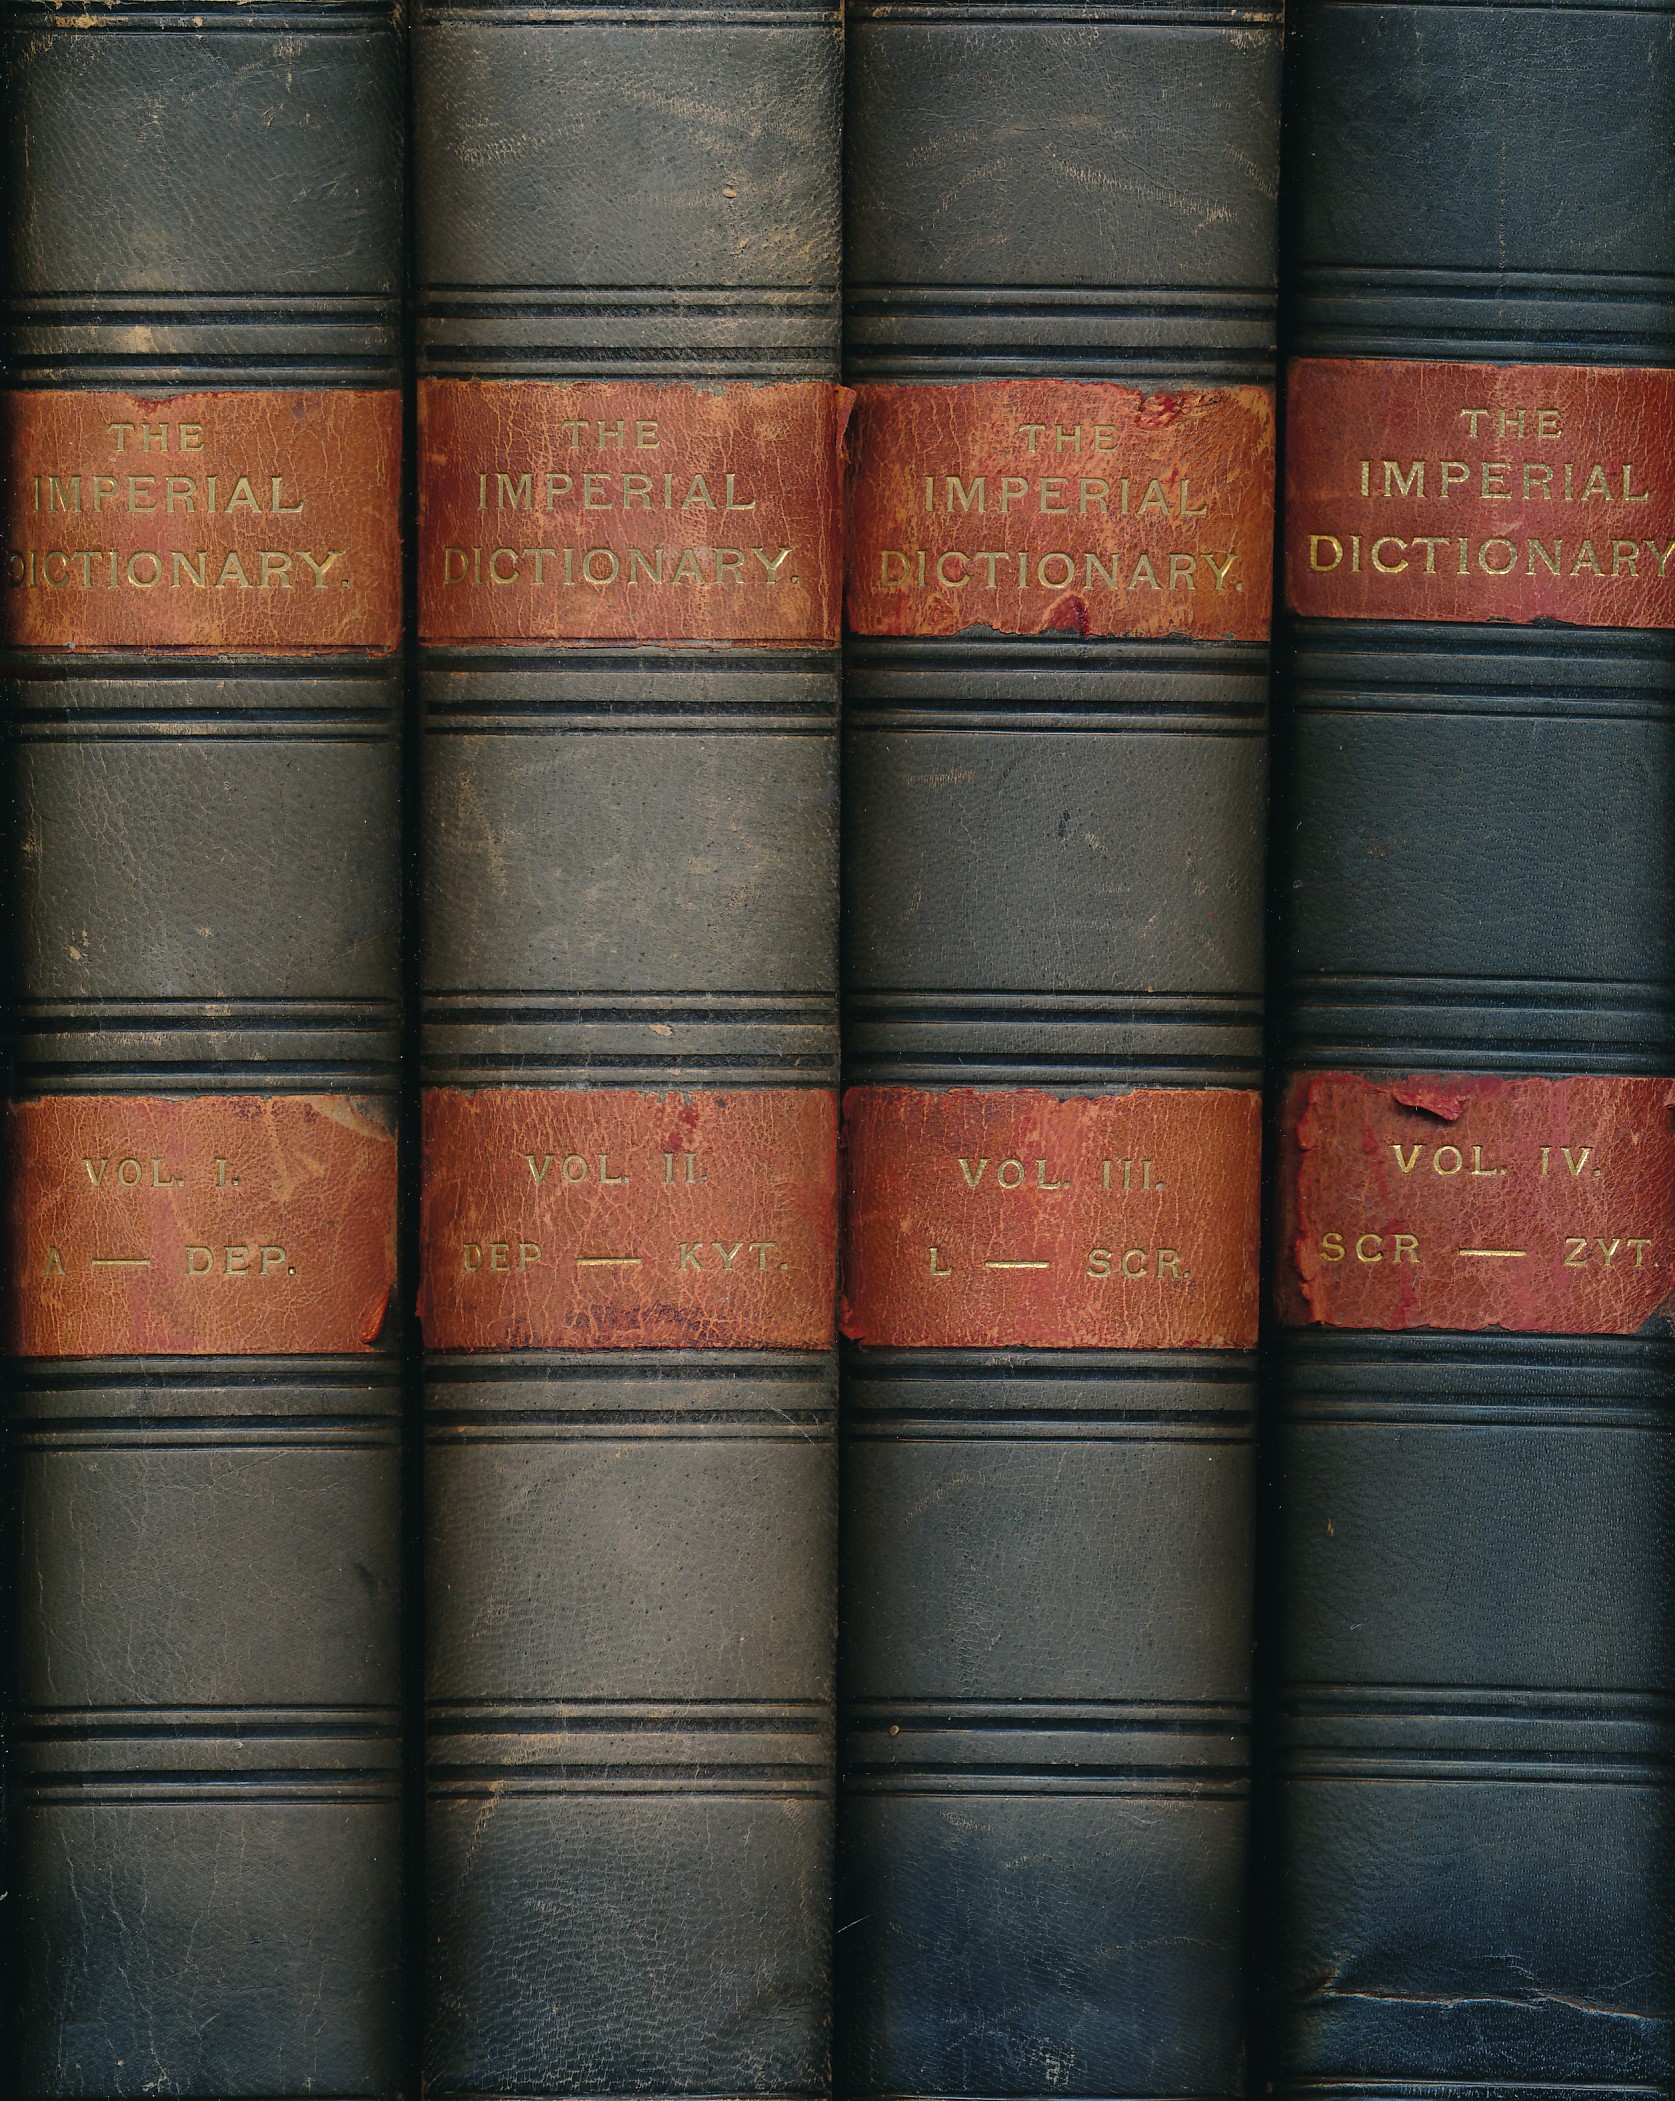 The Imperial Dictionary of the English Language. A Complete Encylopaedic Lexicon, Literary, Scientific and Technological. 4 volume set. 1908.